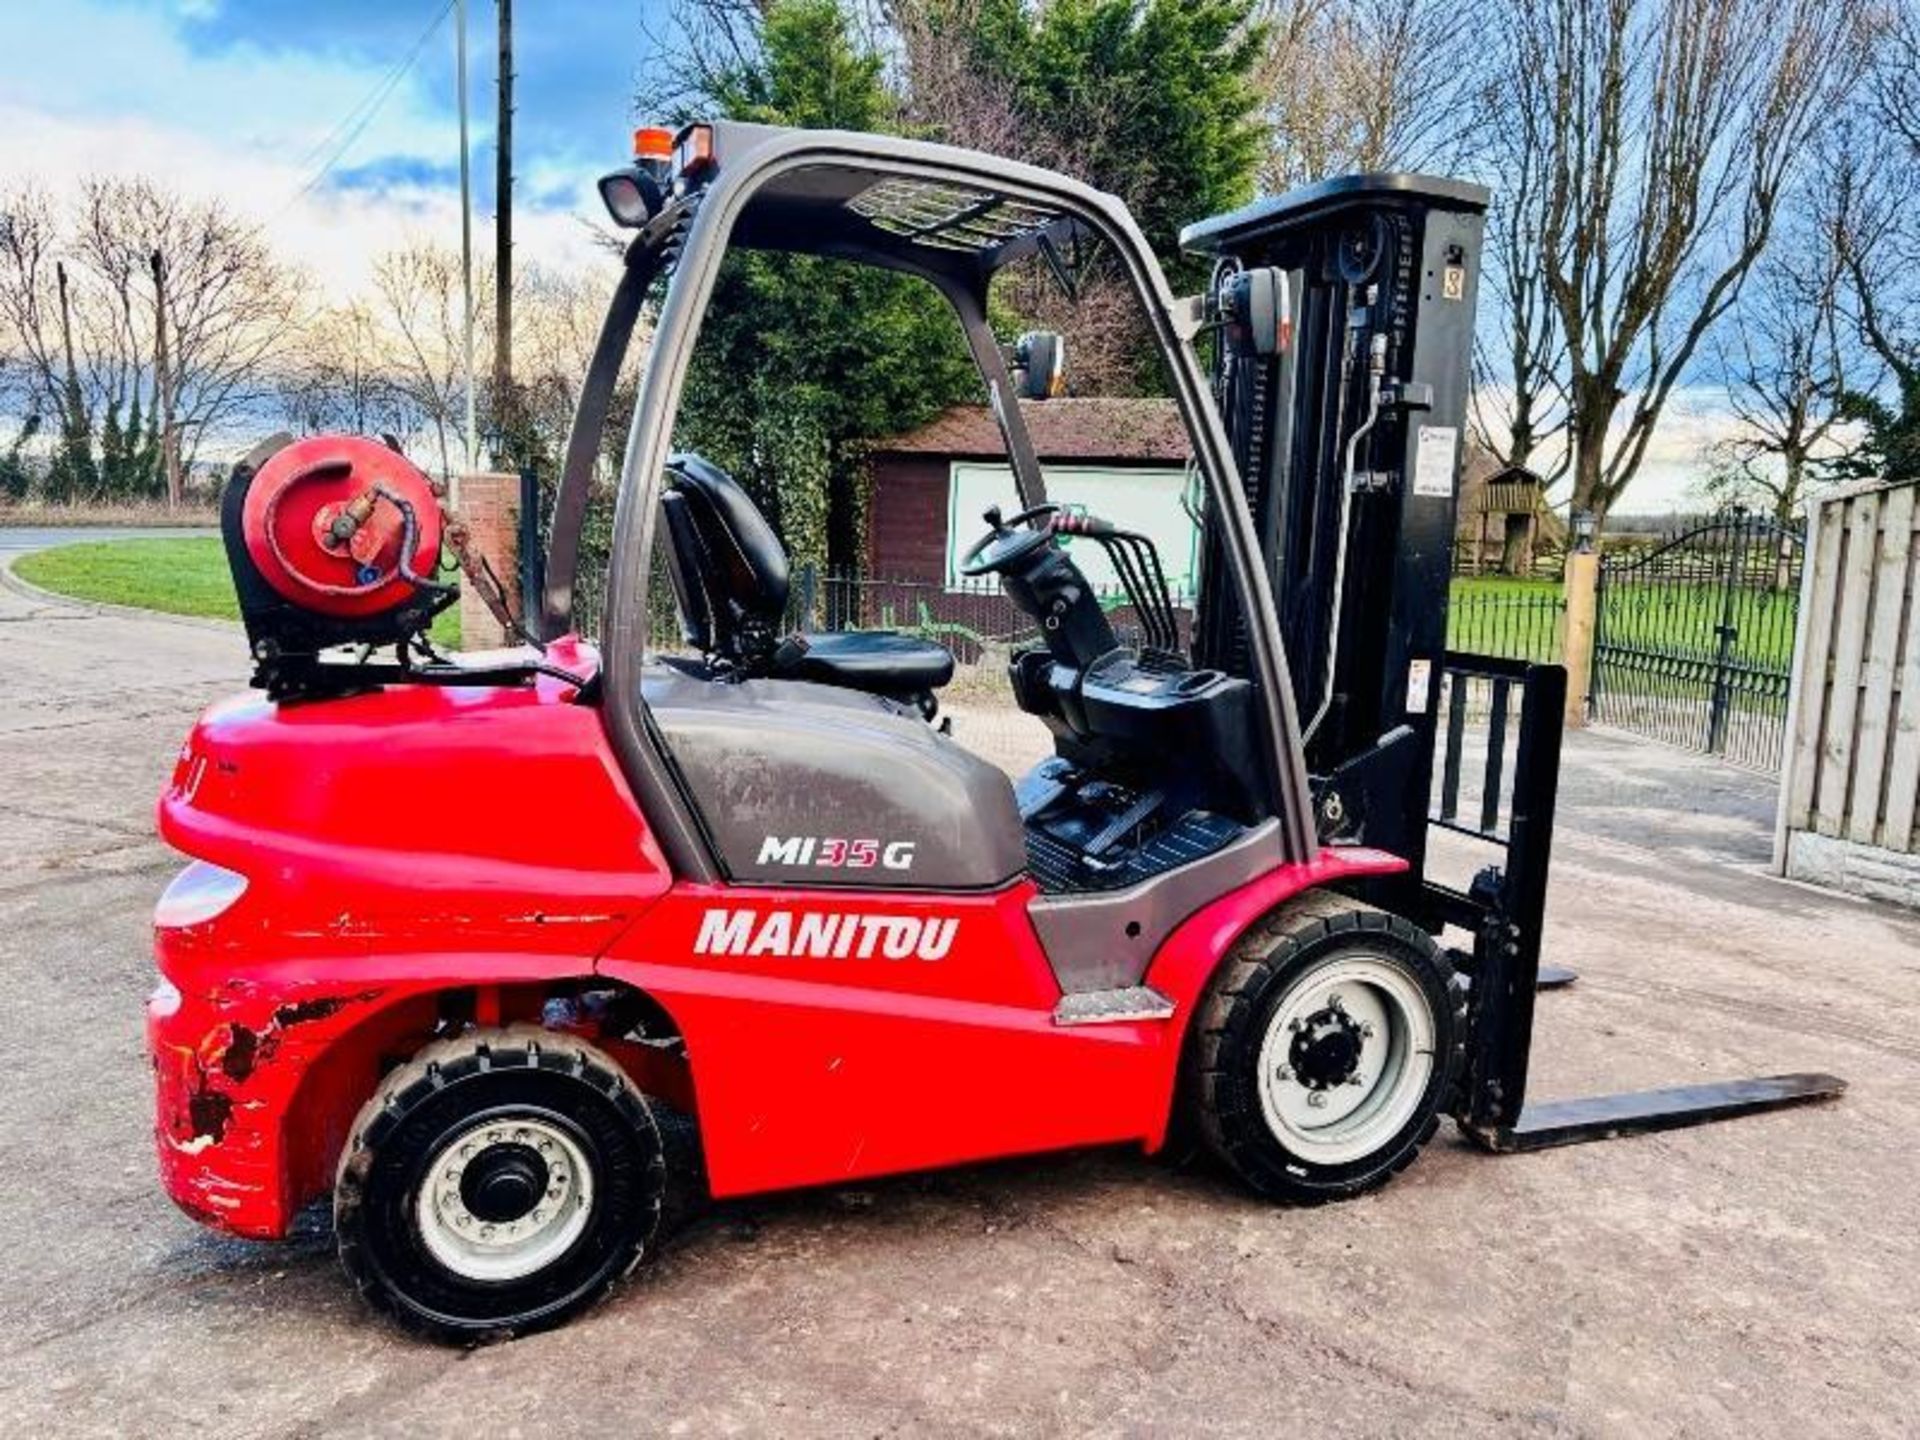 MANITOU MI35G CONTAINER SPEC FORKLIFT *YEAR 2016, 2070 HOURS* C/W SIDE SHIFT - Image 17 of 18